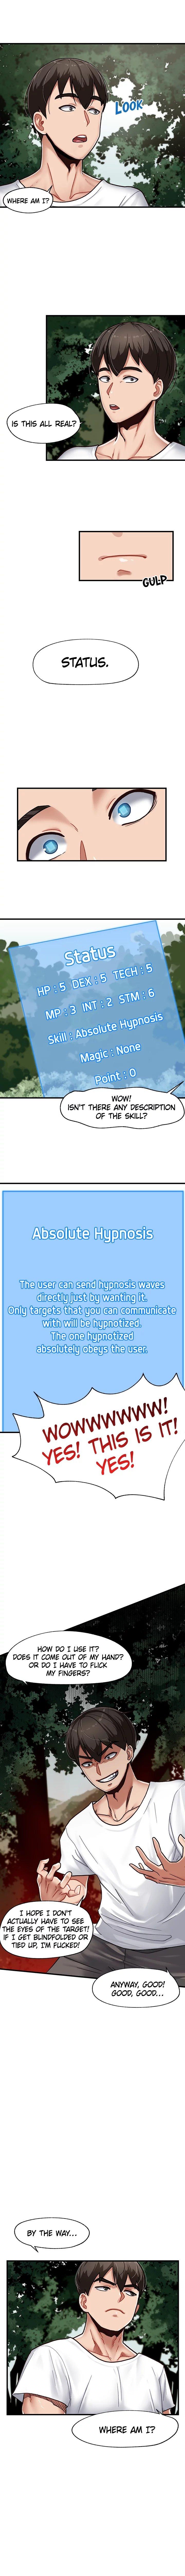 Big Boobs Absolute Hypnosis in Another World Hair - Page 9